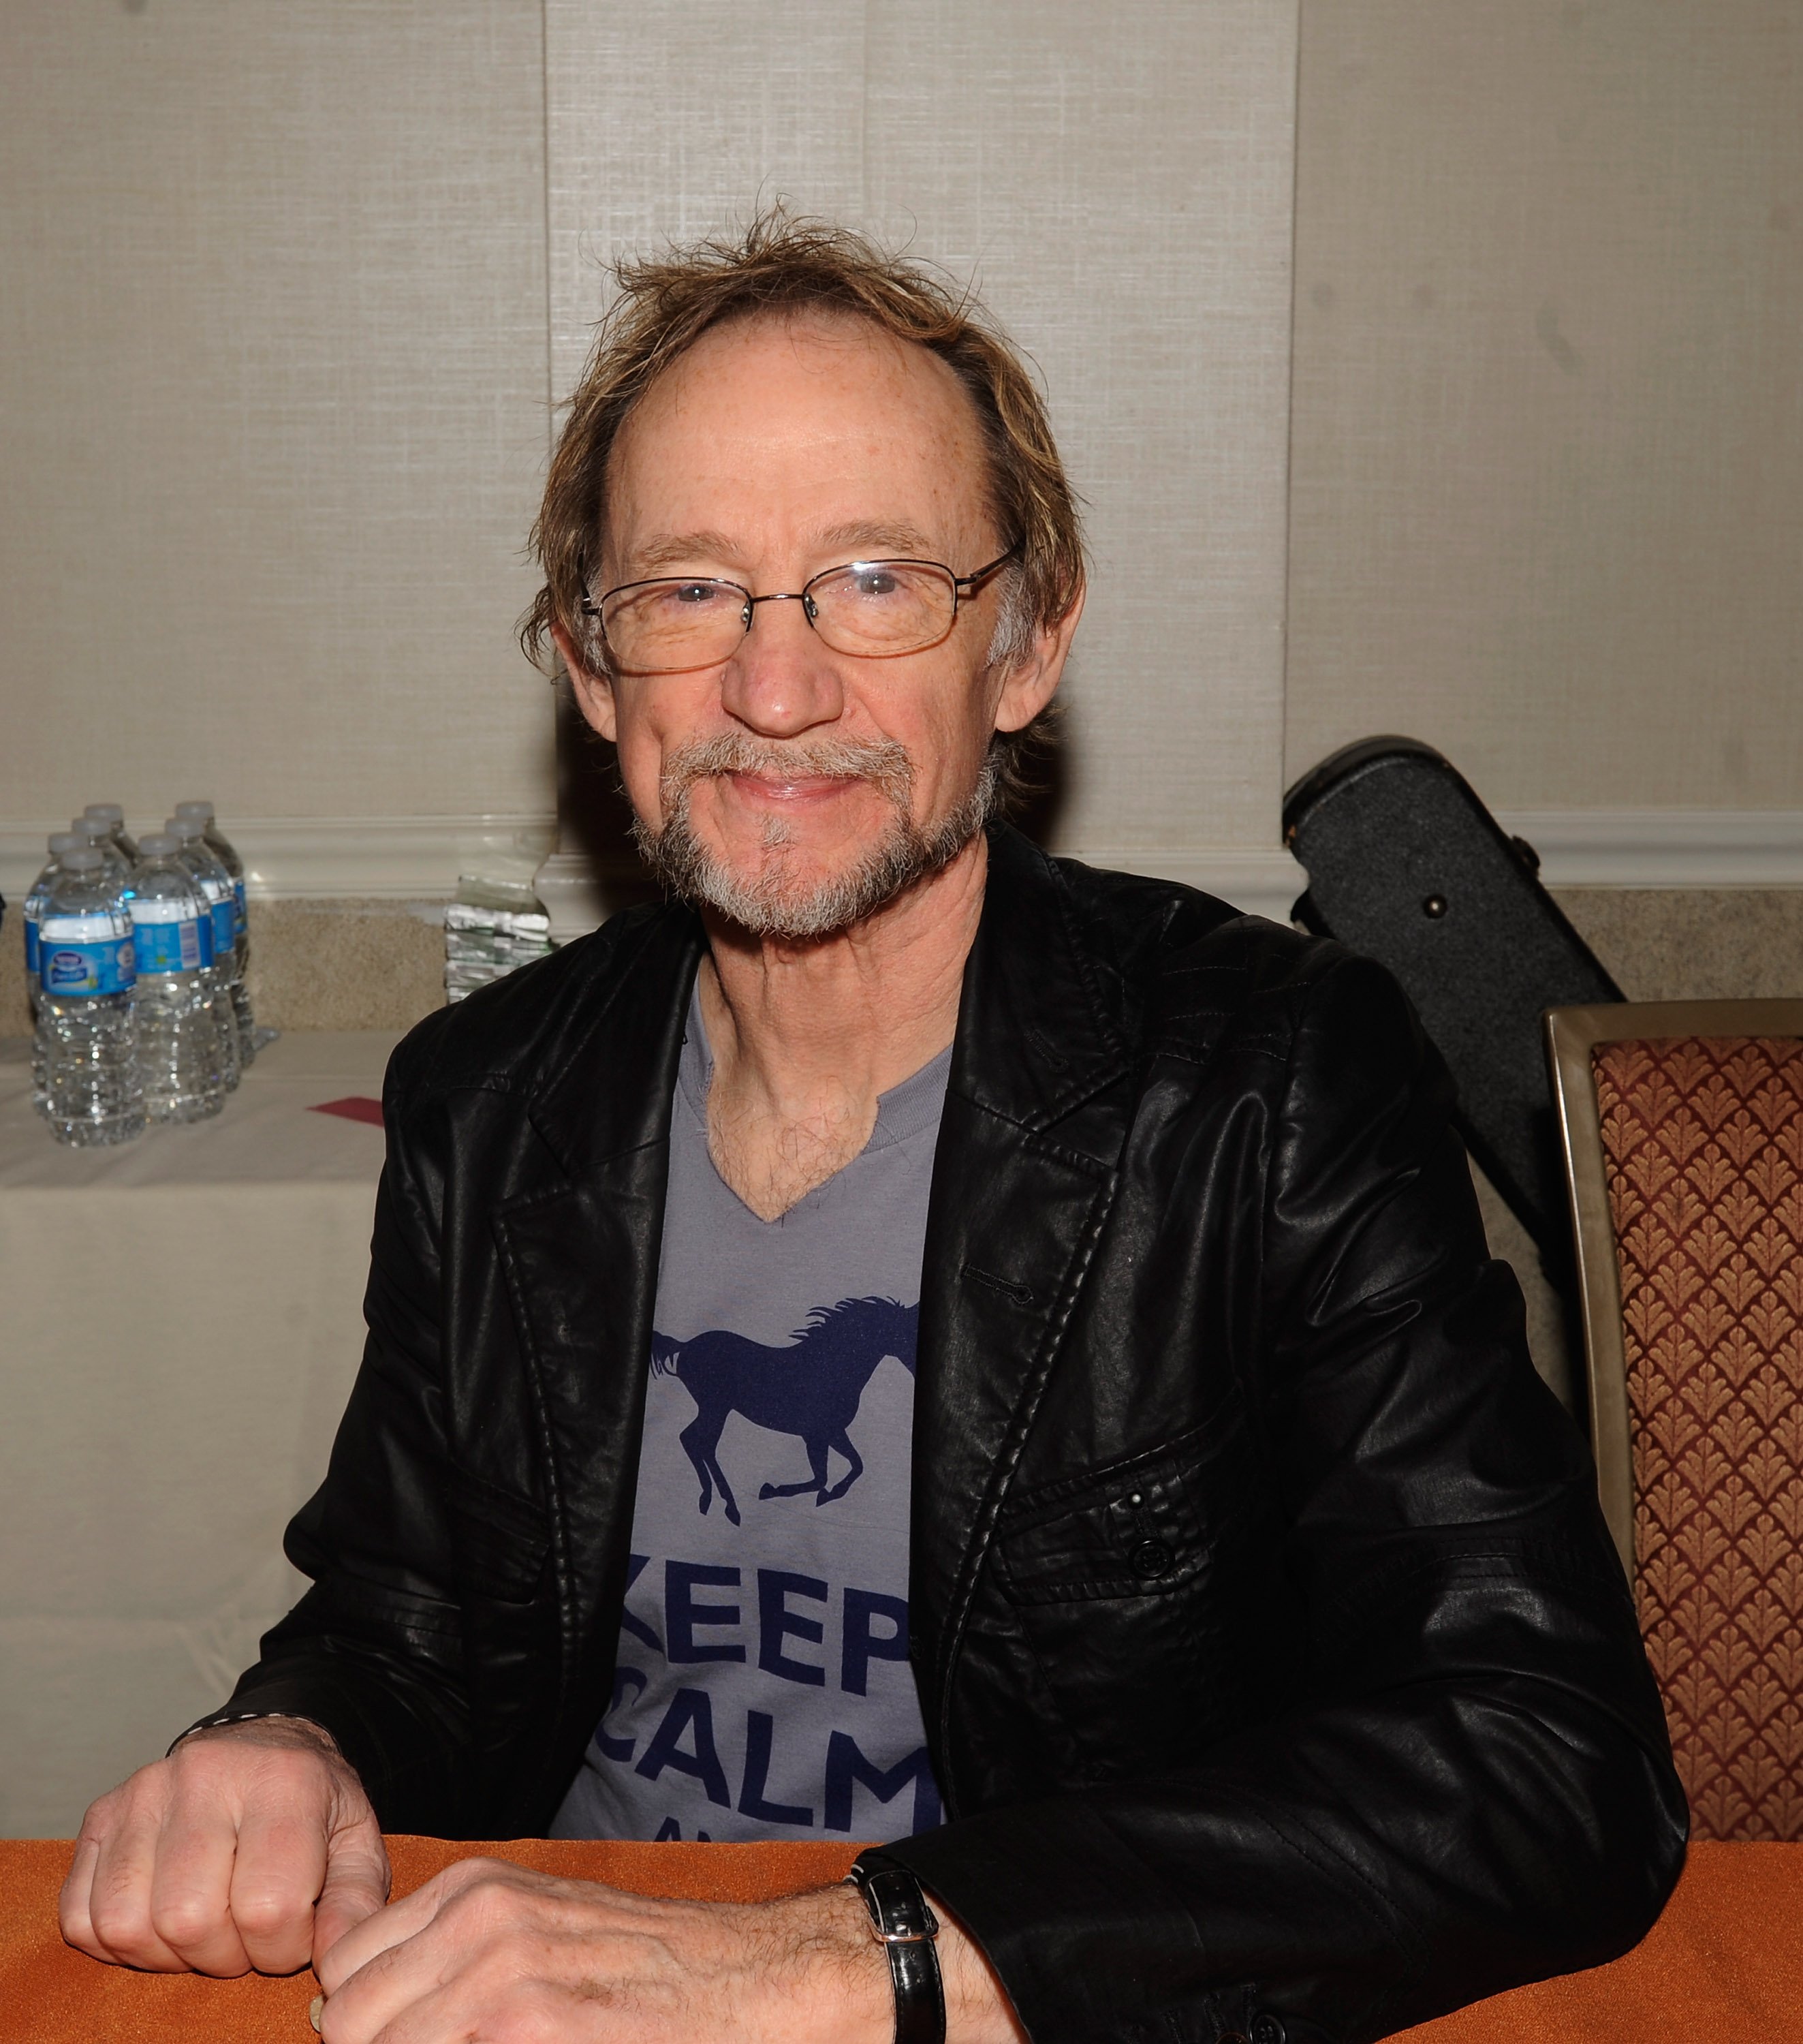 Peter Tork attends the David T. Jones Memorial / Monkees Convention 2013 at the Sheraton Meadowlands Hotel & Conference Center on March 2, 2013 in East Rutherford, New Jersey | Source: Getty Images